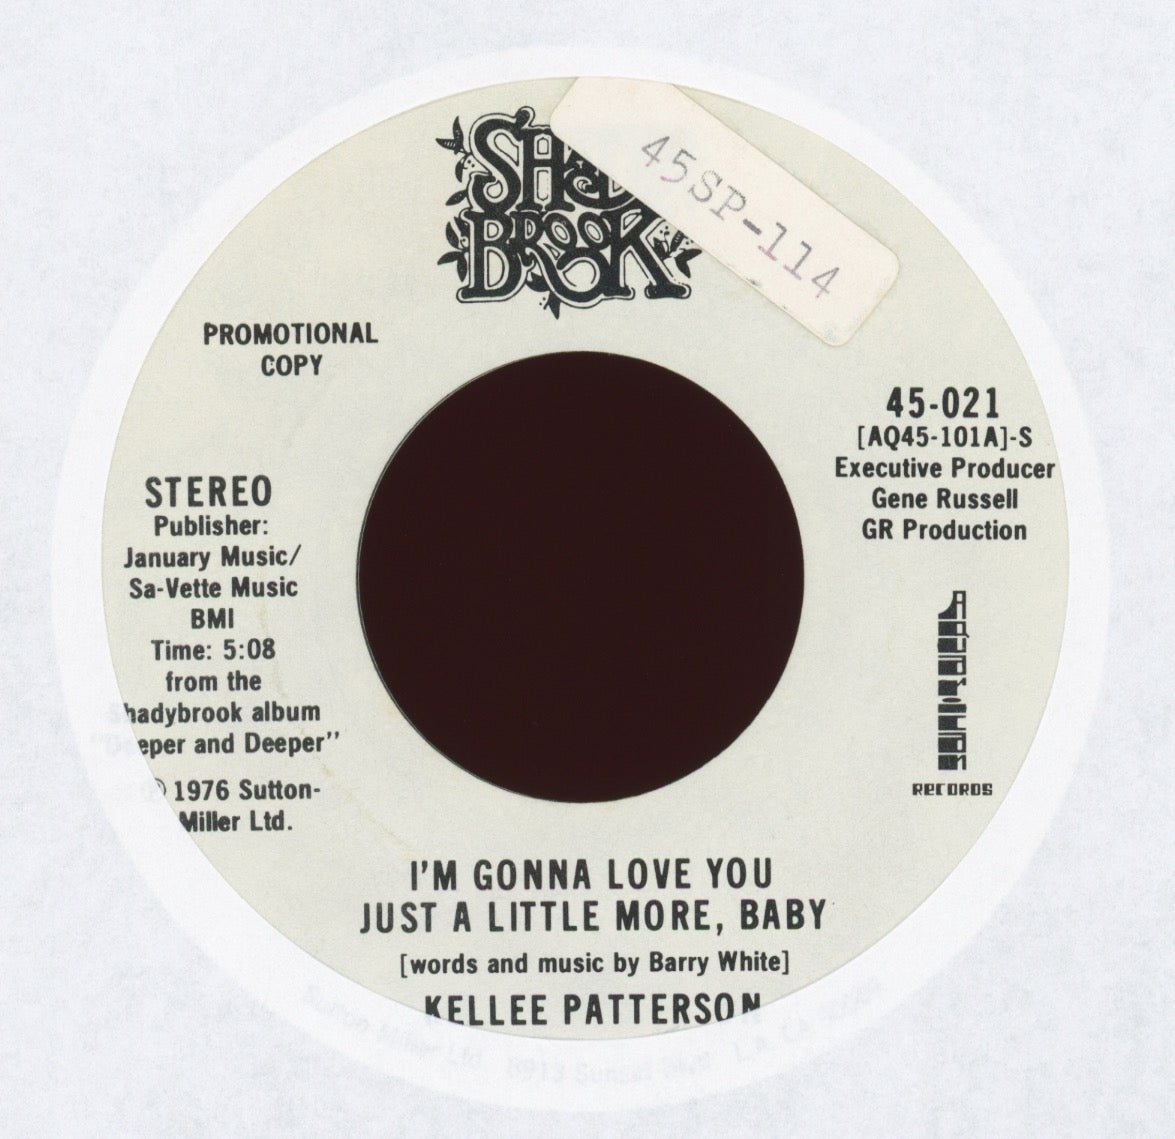 Kellee Patterson - I'm Gonna Love You Just A Little More, Baby on Shady Brook Promo